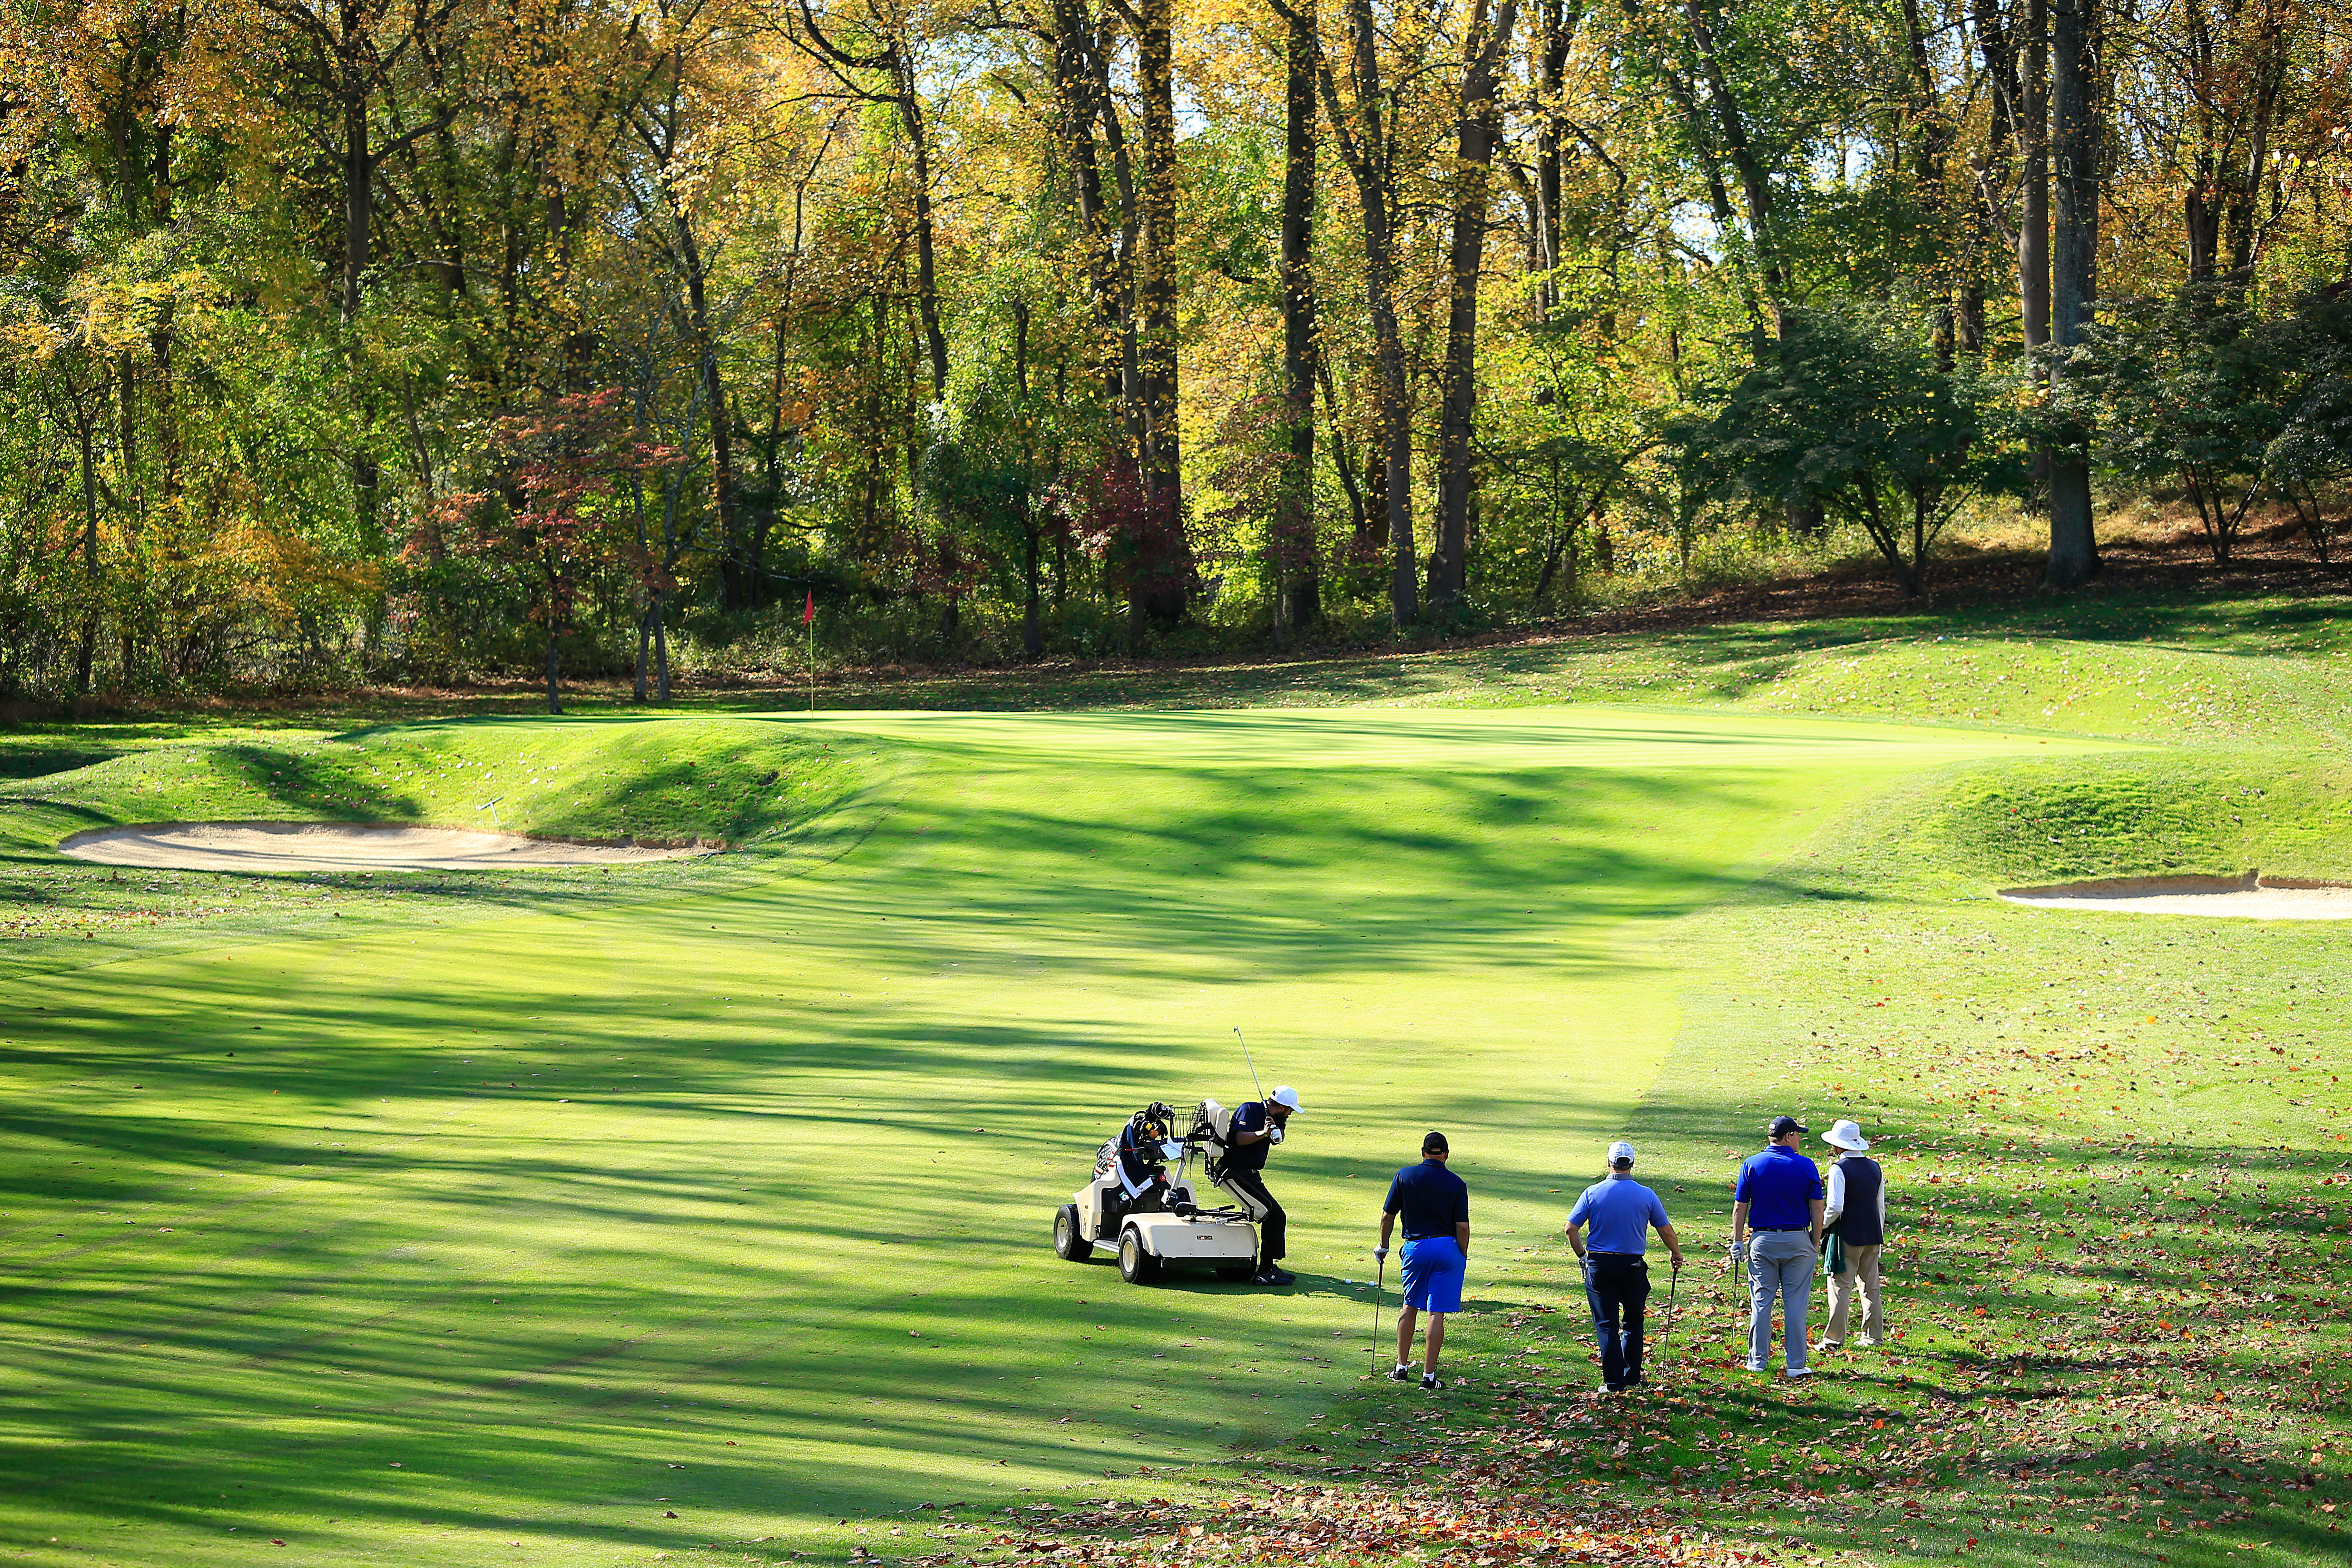 PGA HOPE National Golf & Wellness Week  at Congressional Country Club, Oct. 13-18